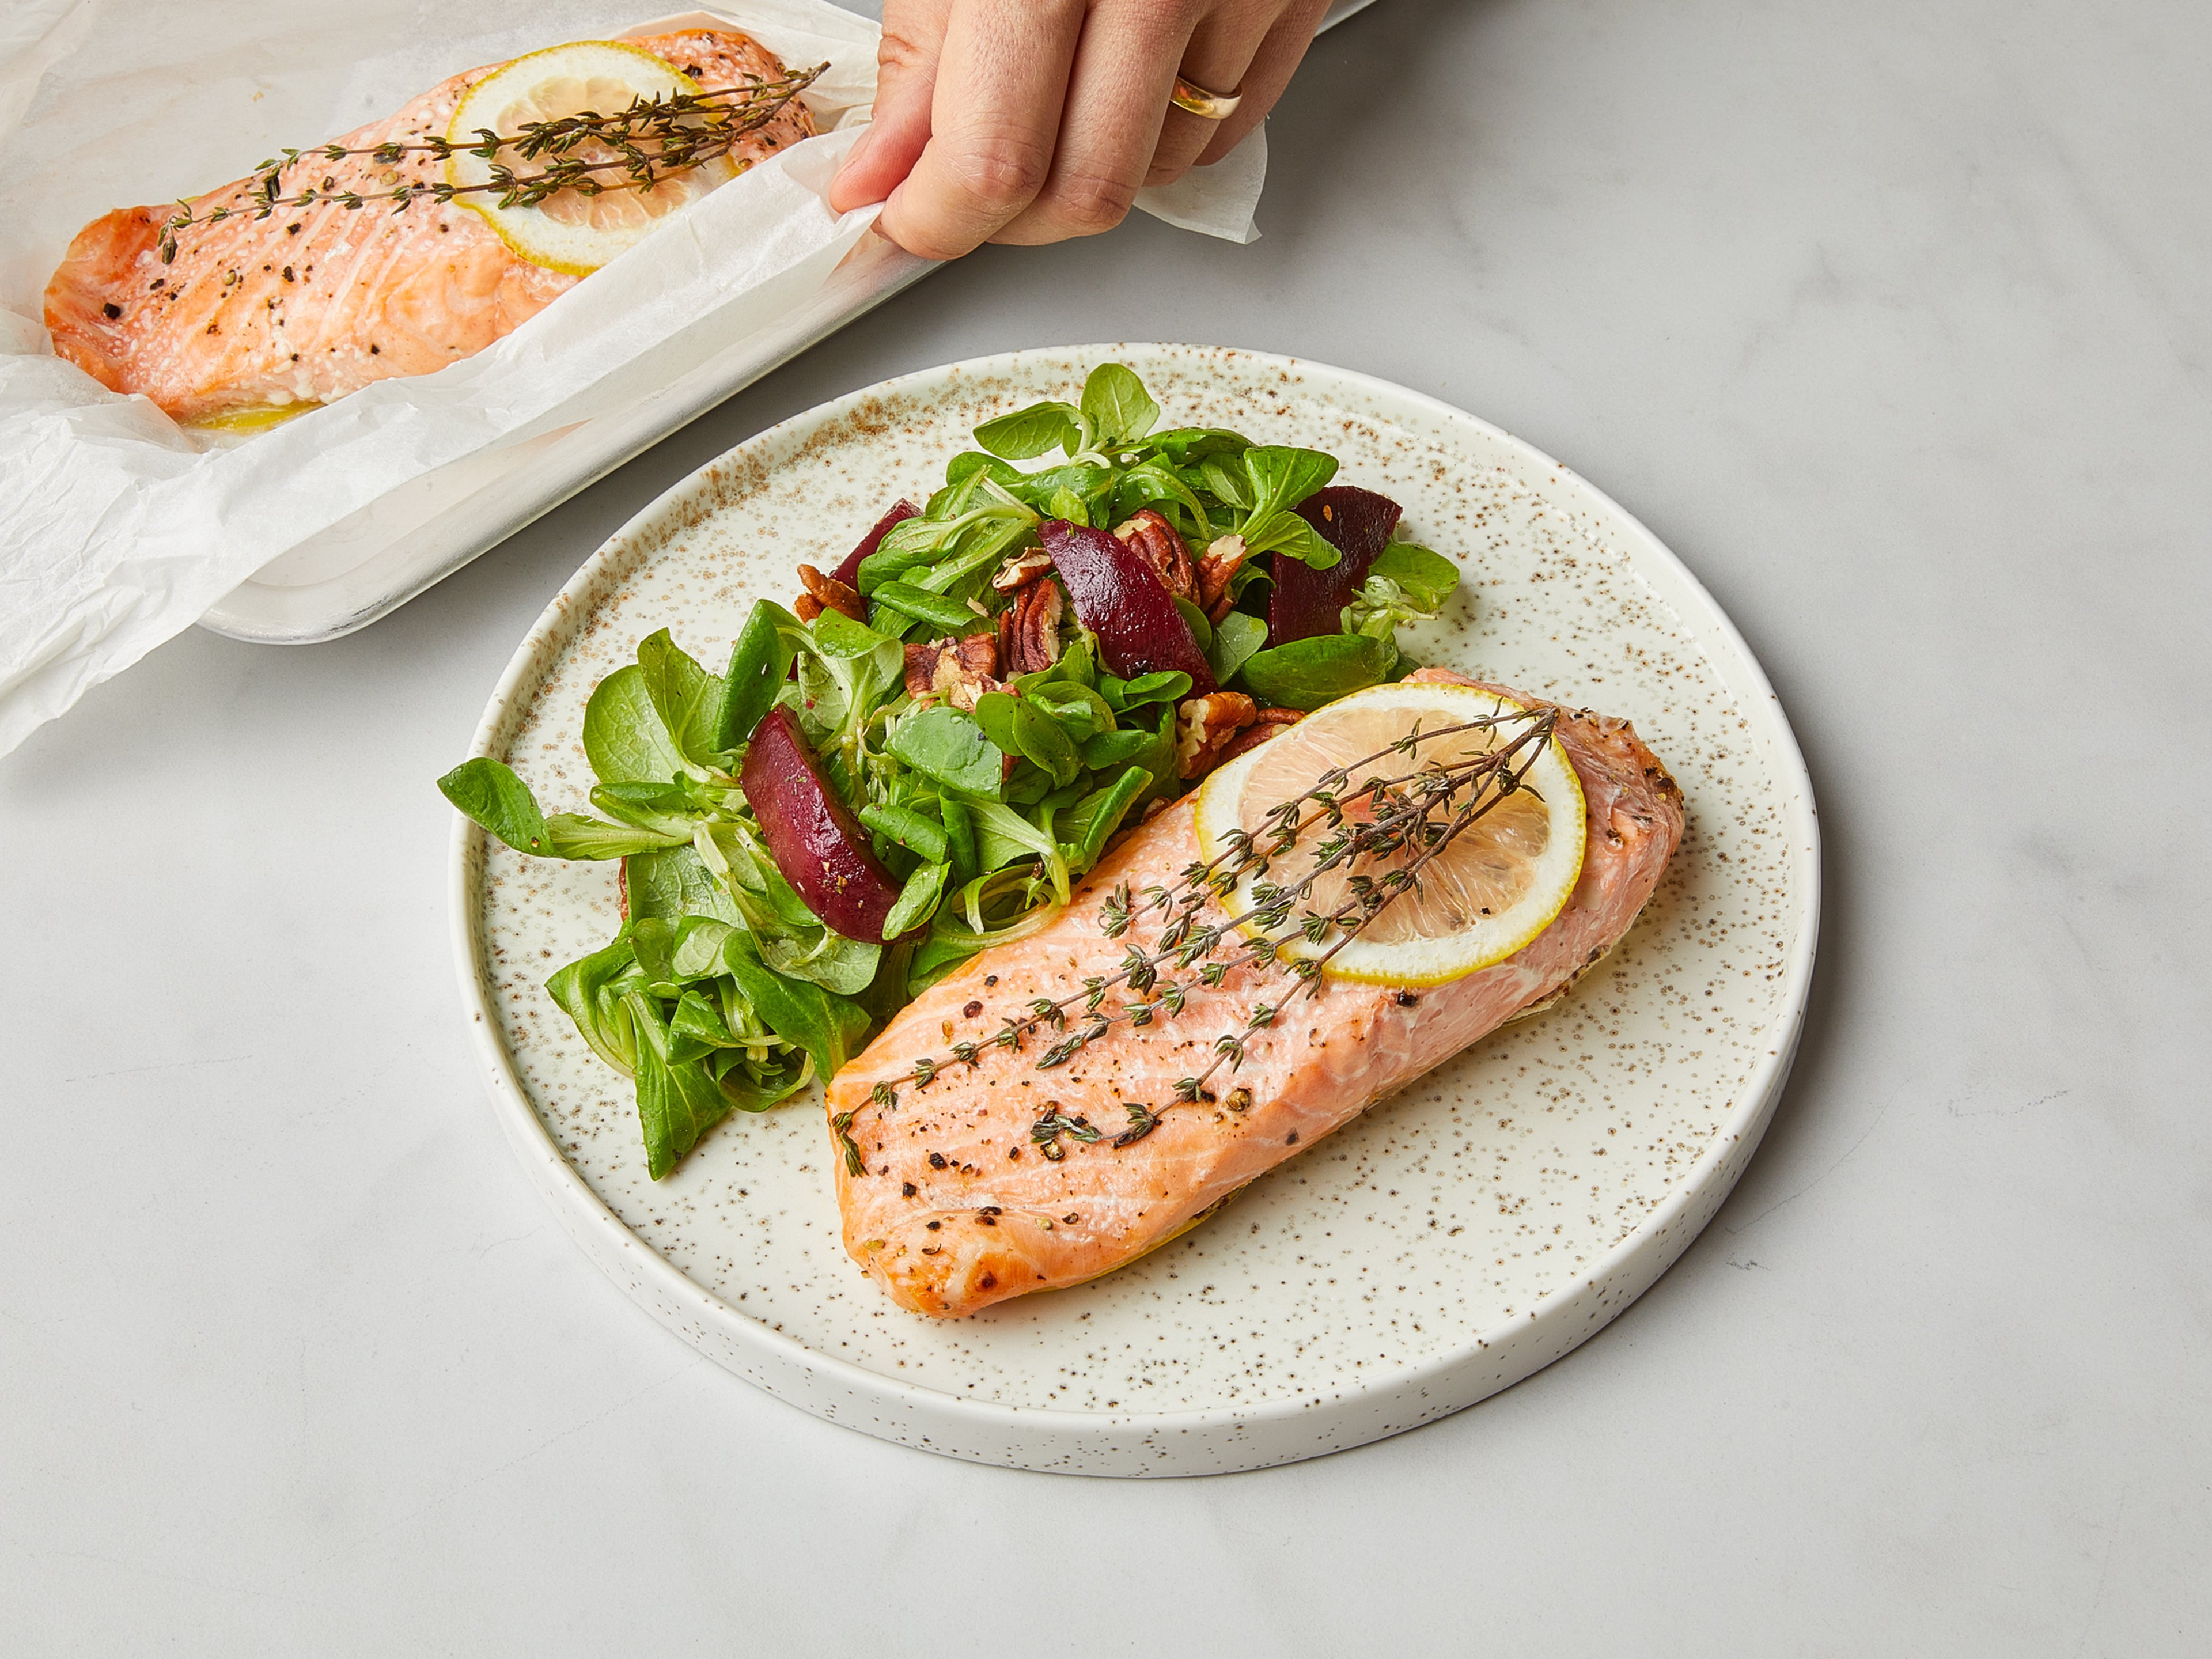 Parchment baked salmon with beetroot salad